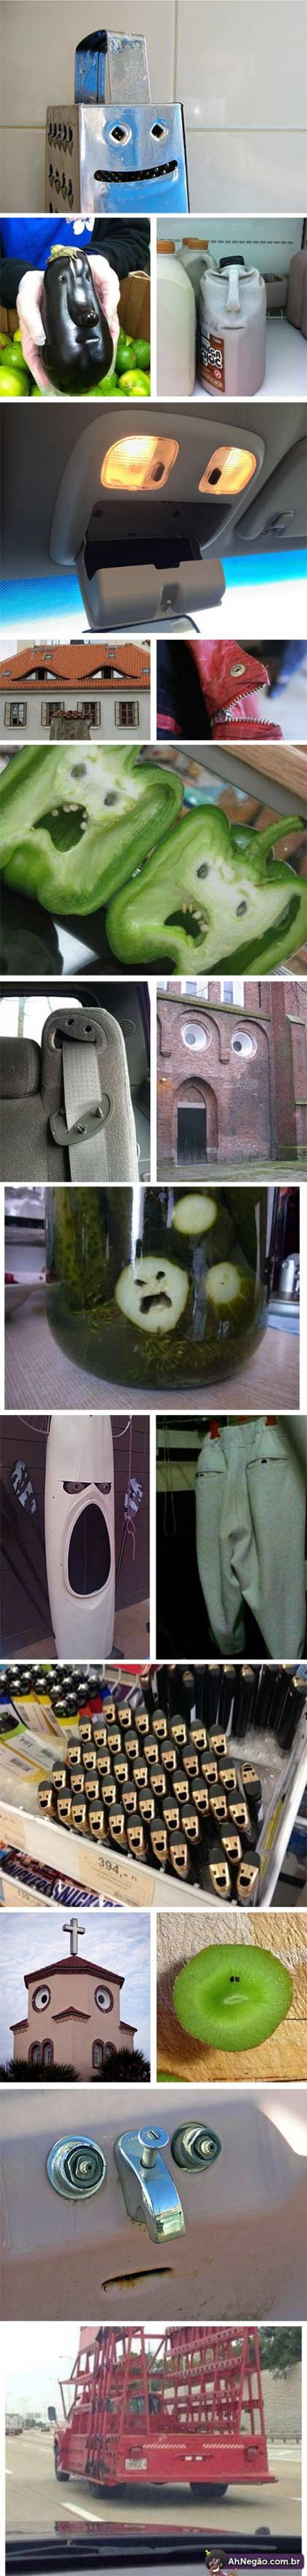 Faces In Every Day Objects